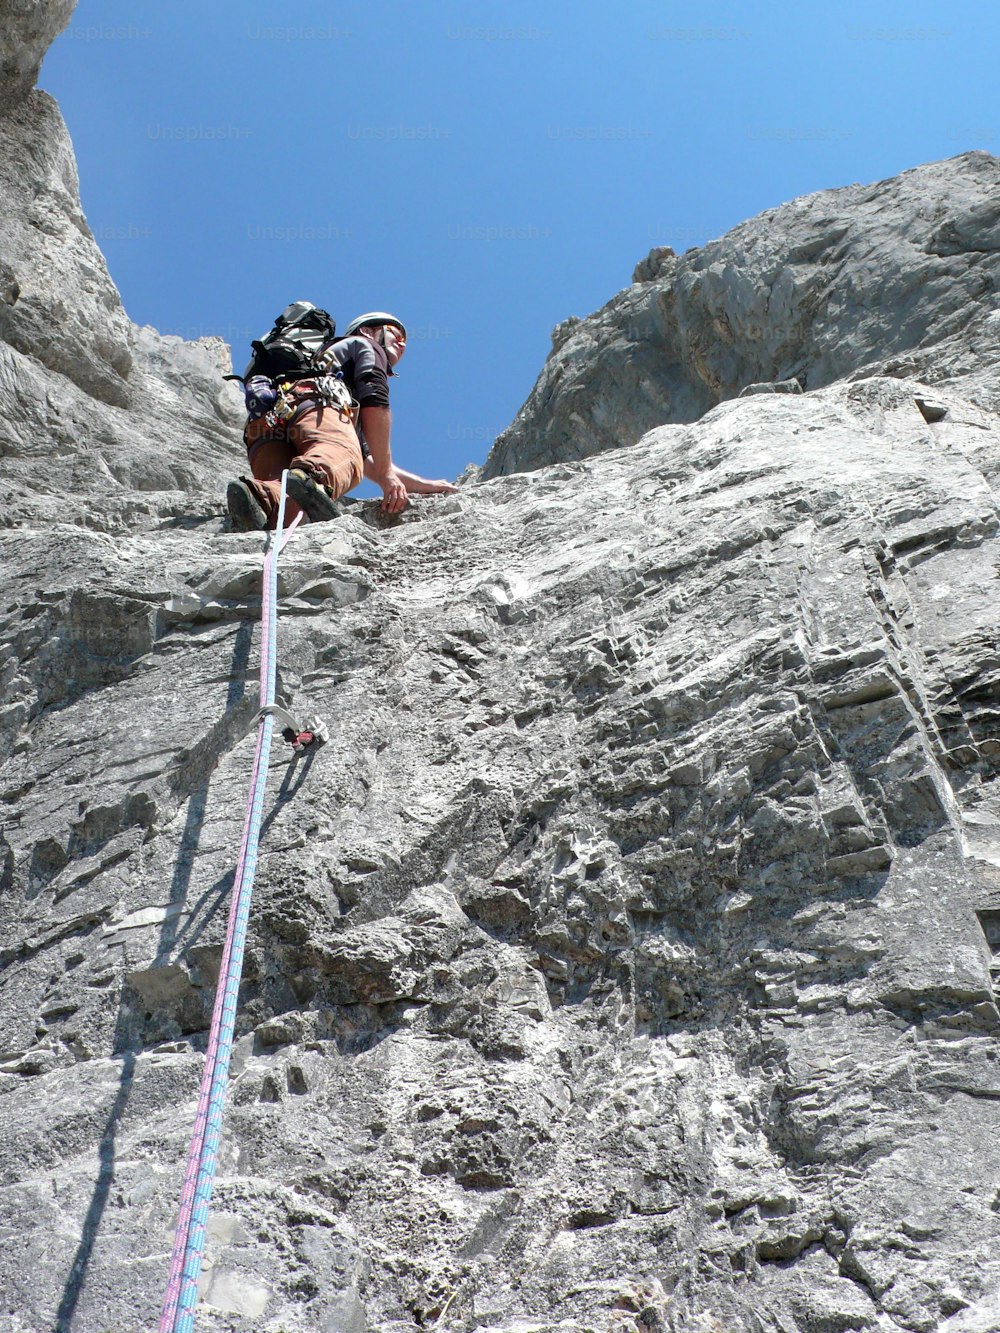 mountain guide rock climbing in the Alps of Switzerland in the Raetikon region near Klosters on a beautiful summer day